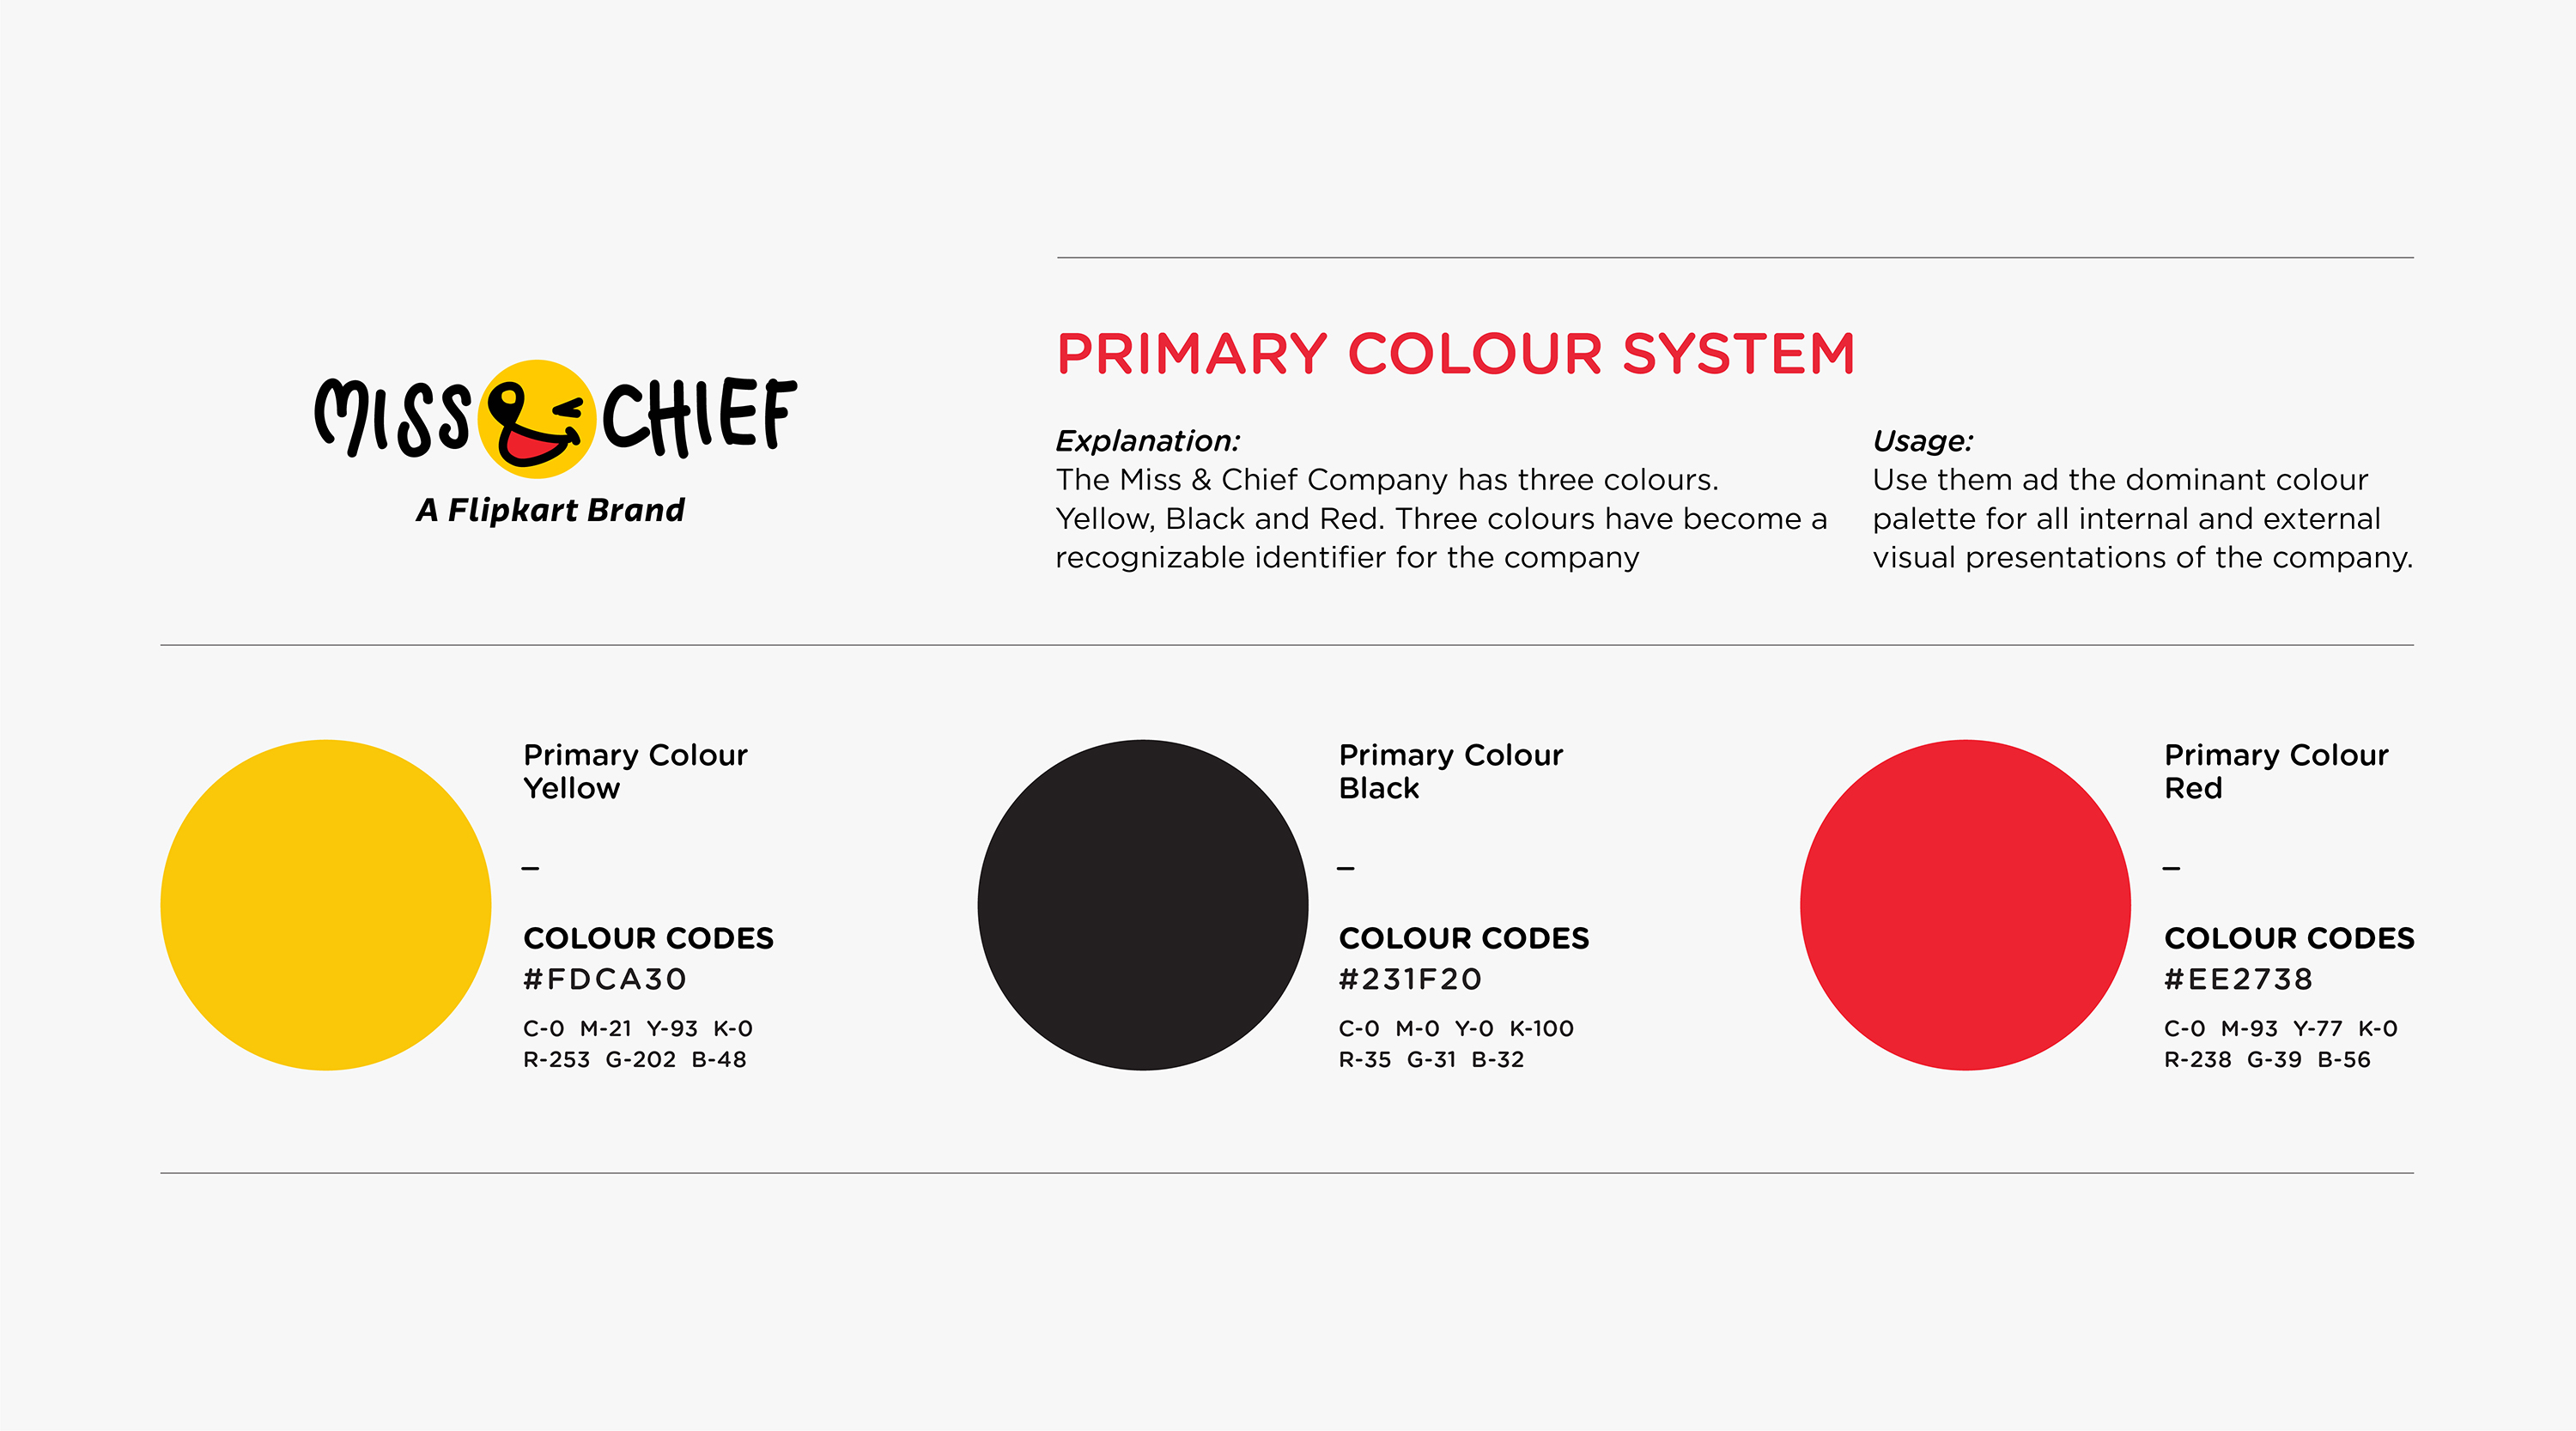 Primary Colour Scheme for the brand